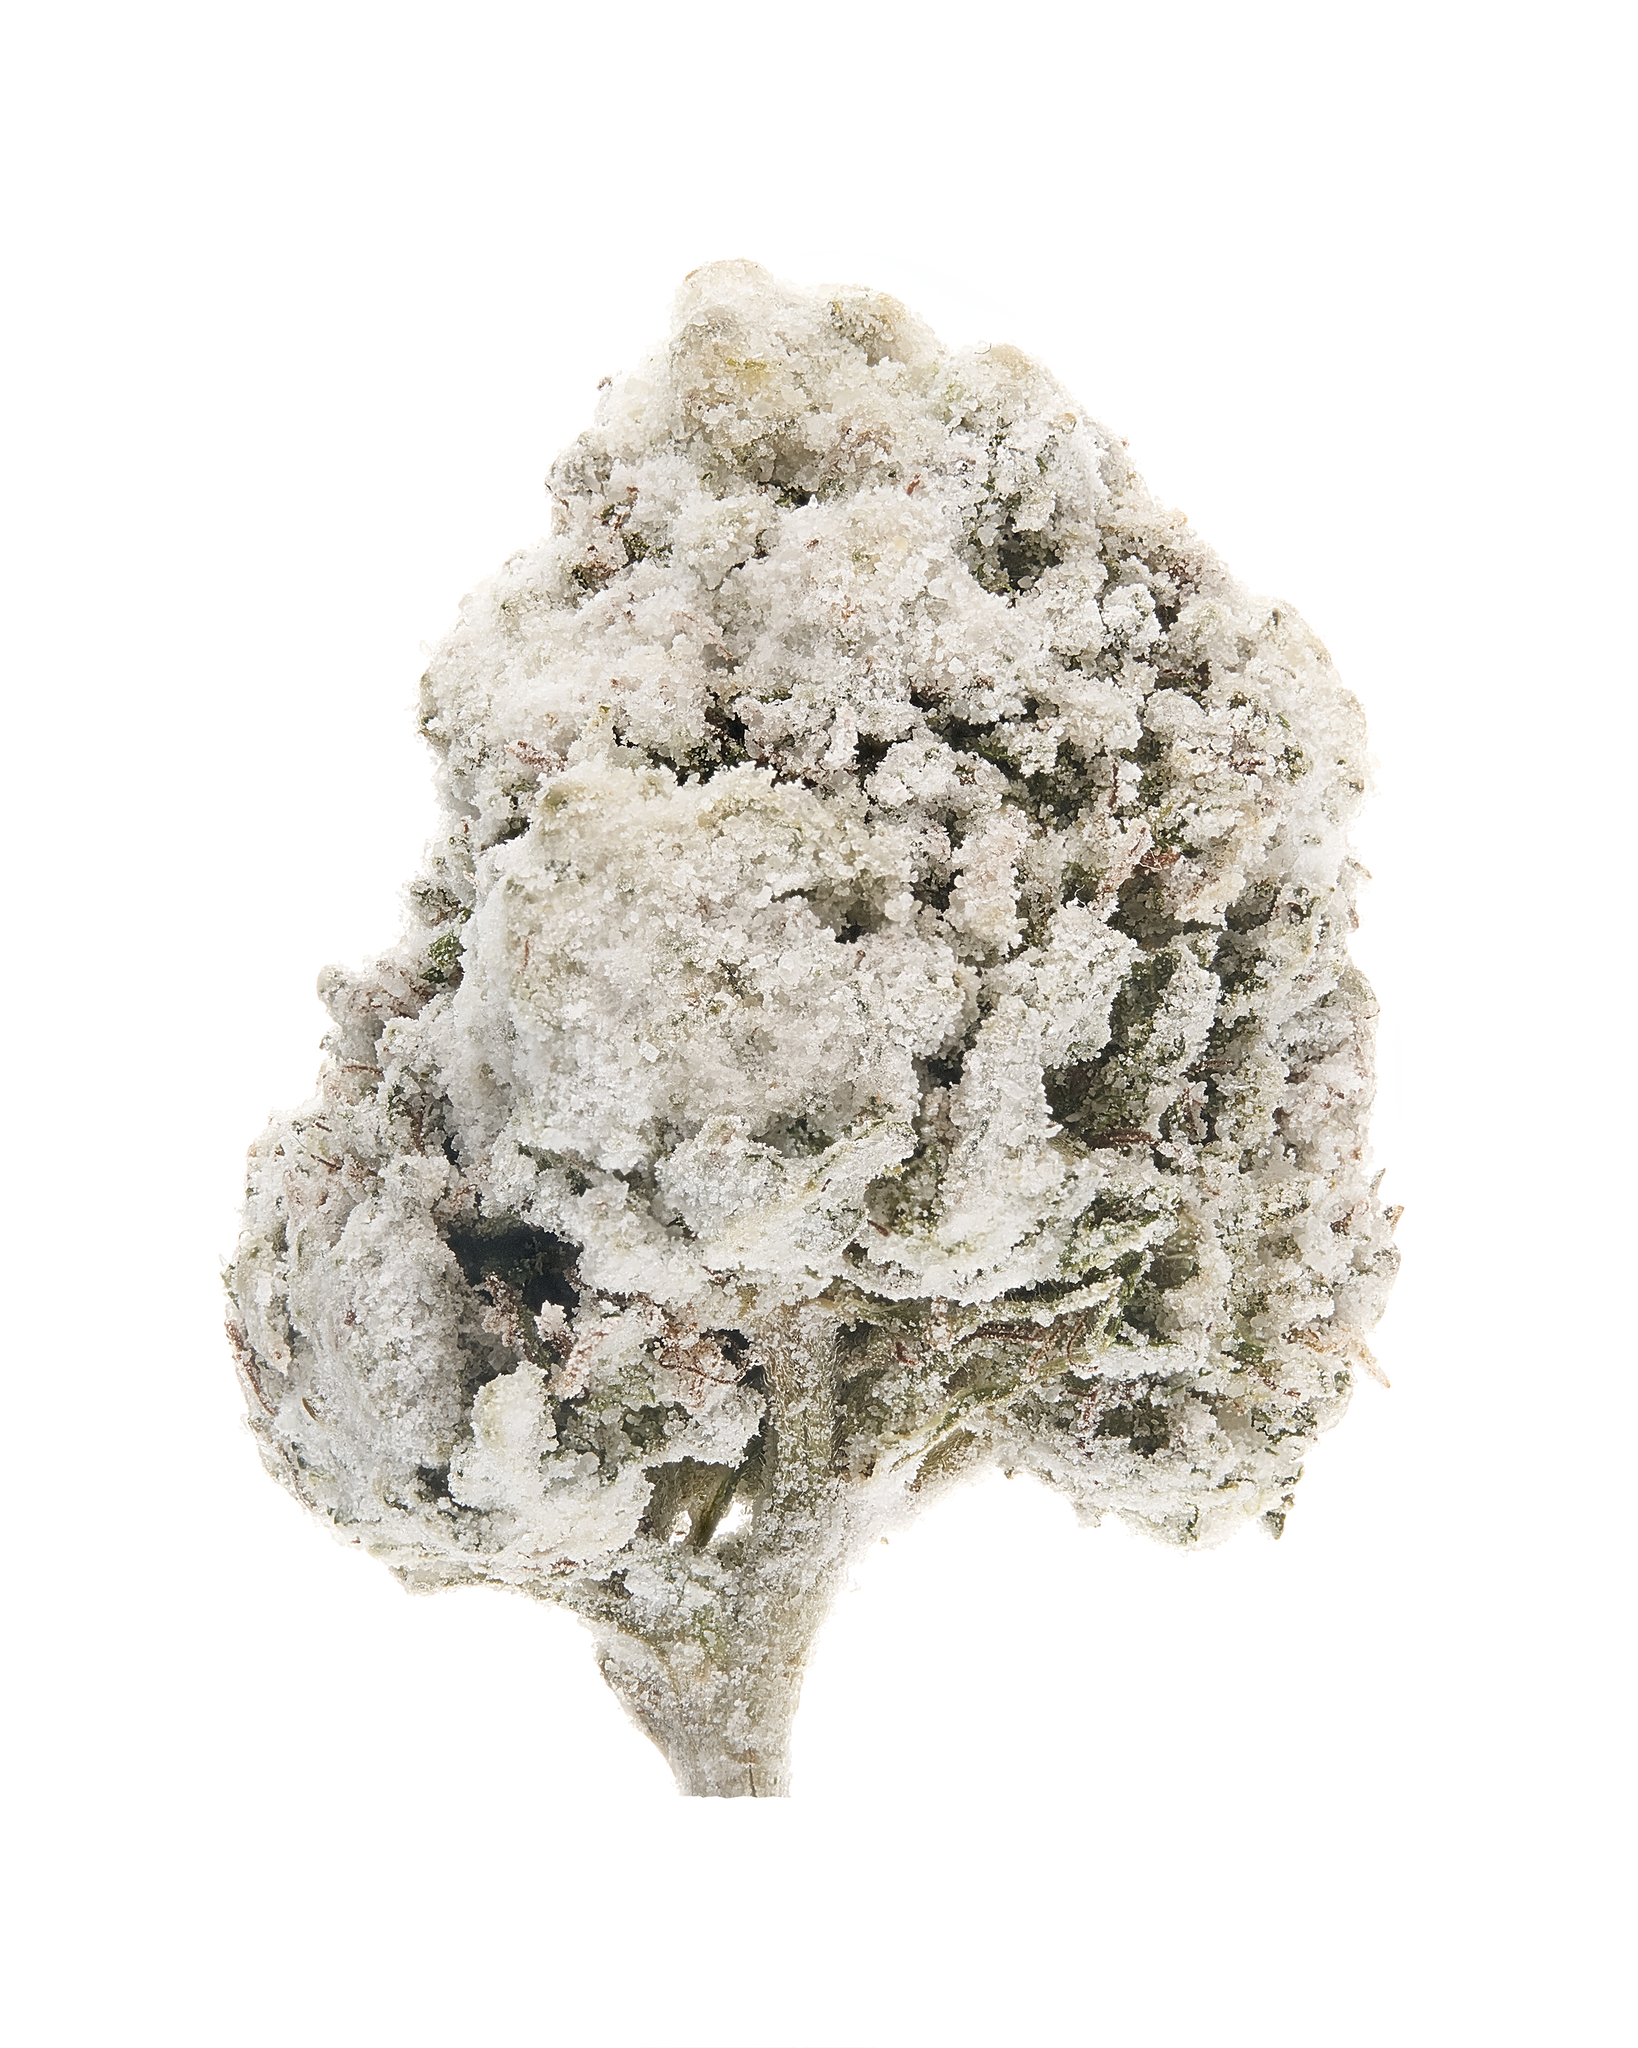 Hemp Moon Rocks, Asteroids, Hash, & other Connoisseur products